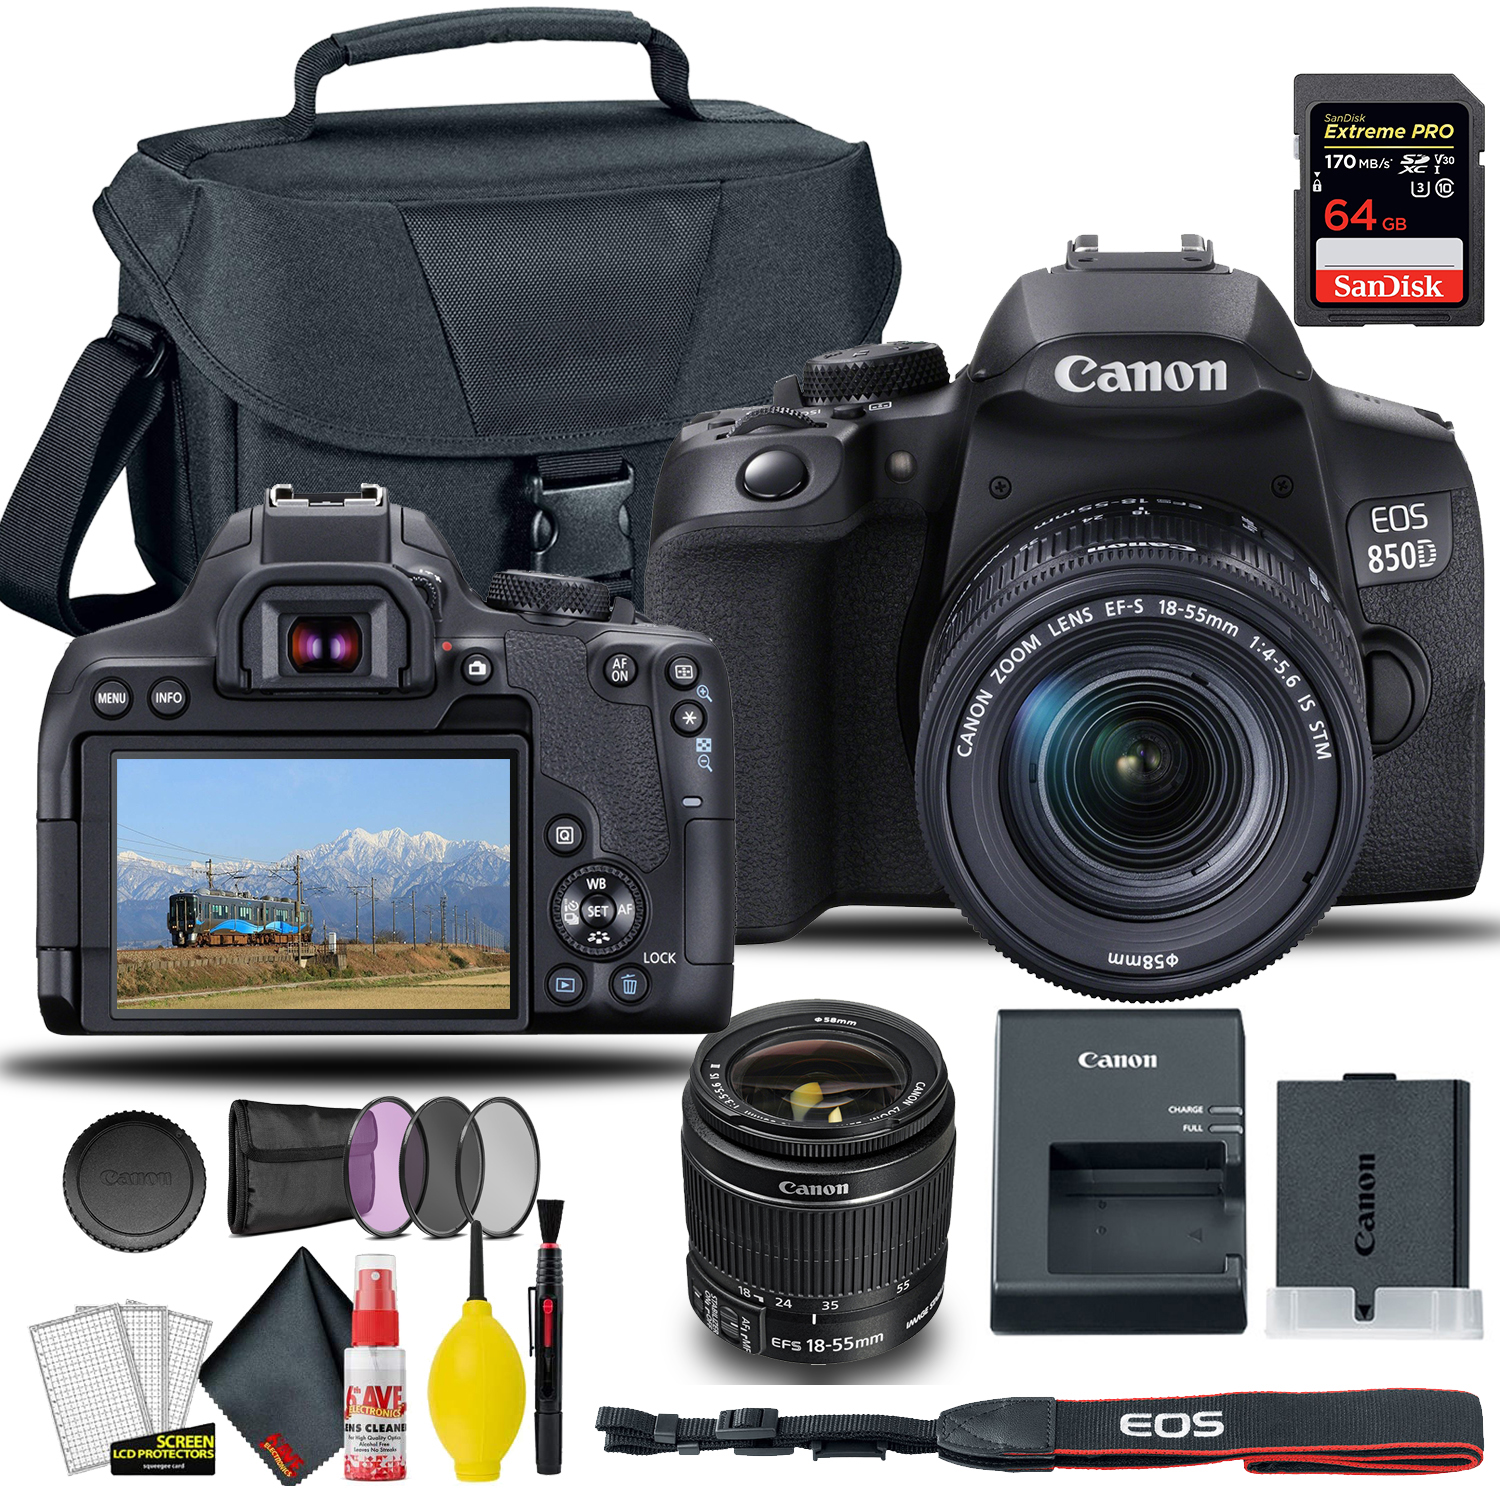 Canon EOS 850D / Rebel T8i DSLR Camera with 18-55mm Lens (Black) + Creative Filter Set, EOS Camera Bag + Sandisk Extreme Pro 64GB Card + 6AVE Electronics Cleaning Set, and More (International Model) - image 1 of 2